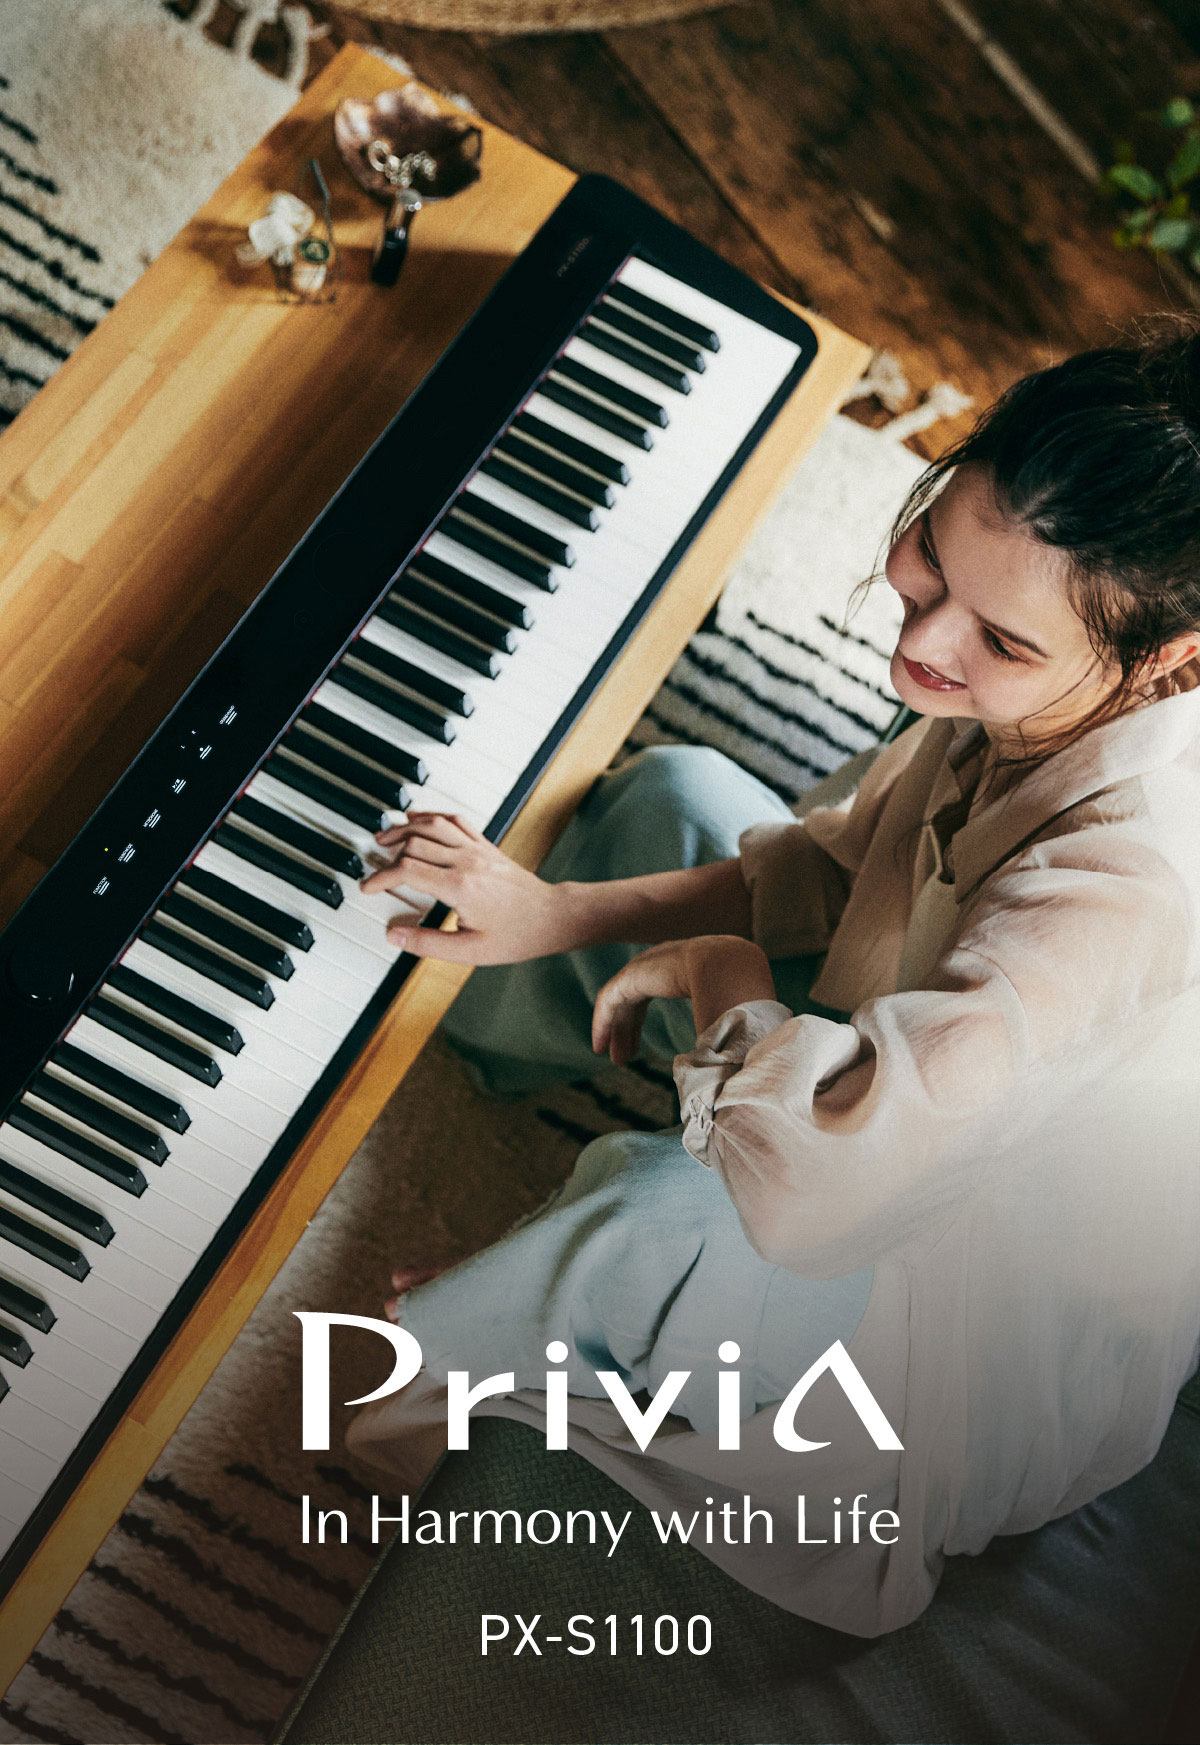 Privia, In Harmony with Life, PX-S1100